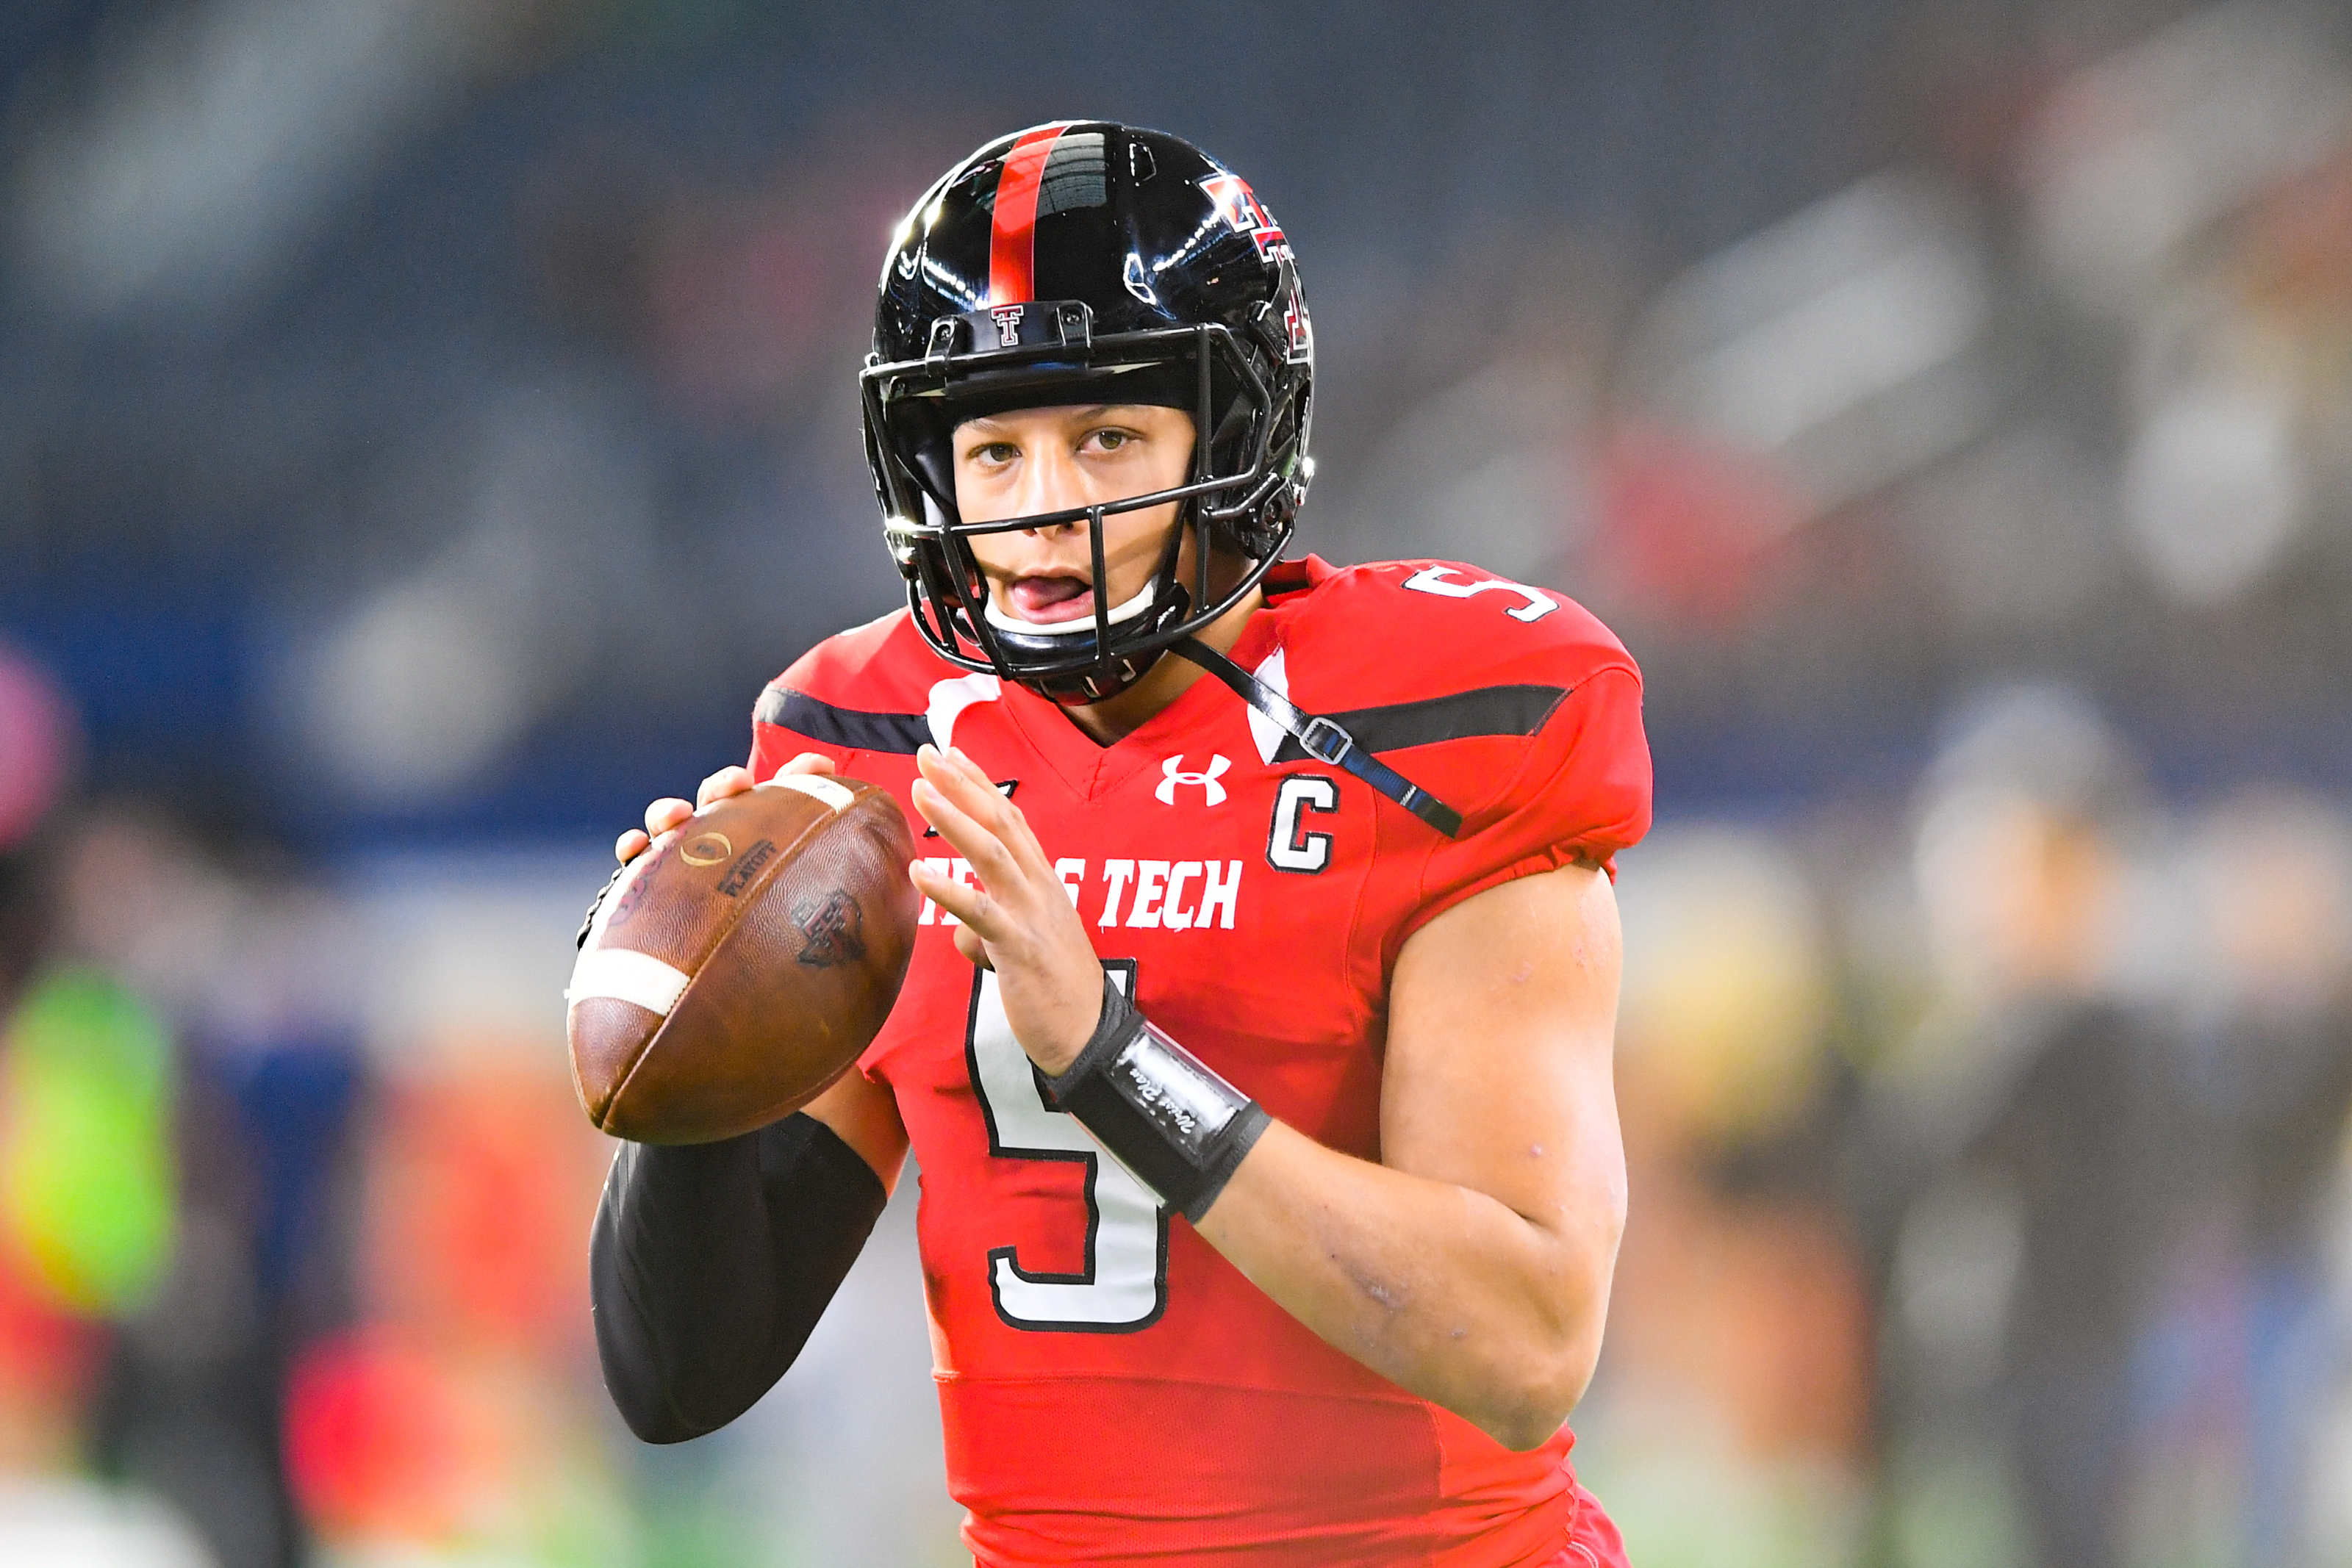 Texas Tech Football: Remembering Patrick Mahomes' five best games